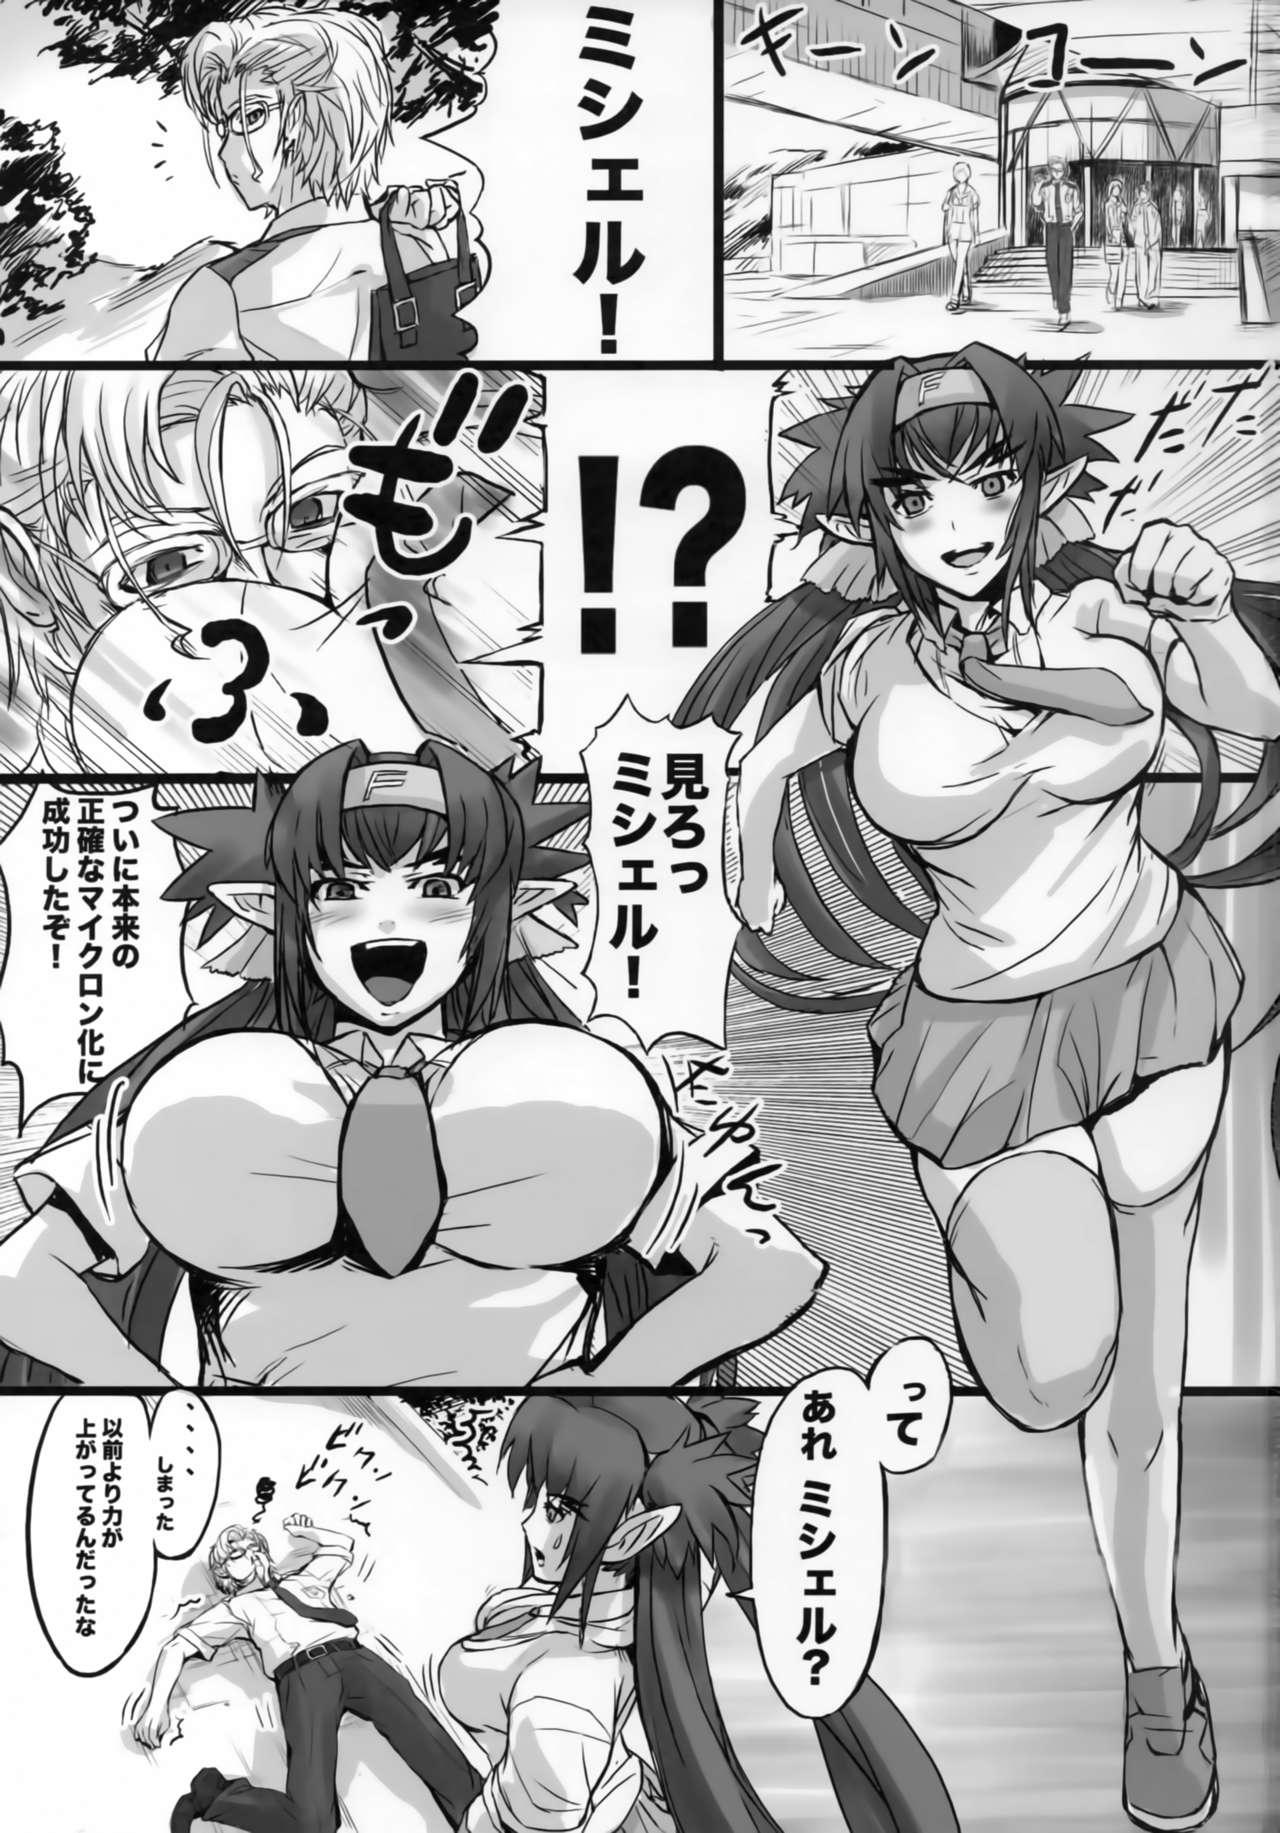 Fucked Sexcross Frontier - Macross frontier Girl On Girl - Page 2